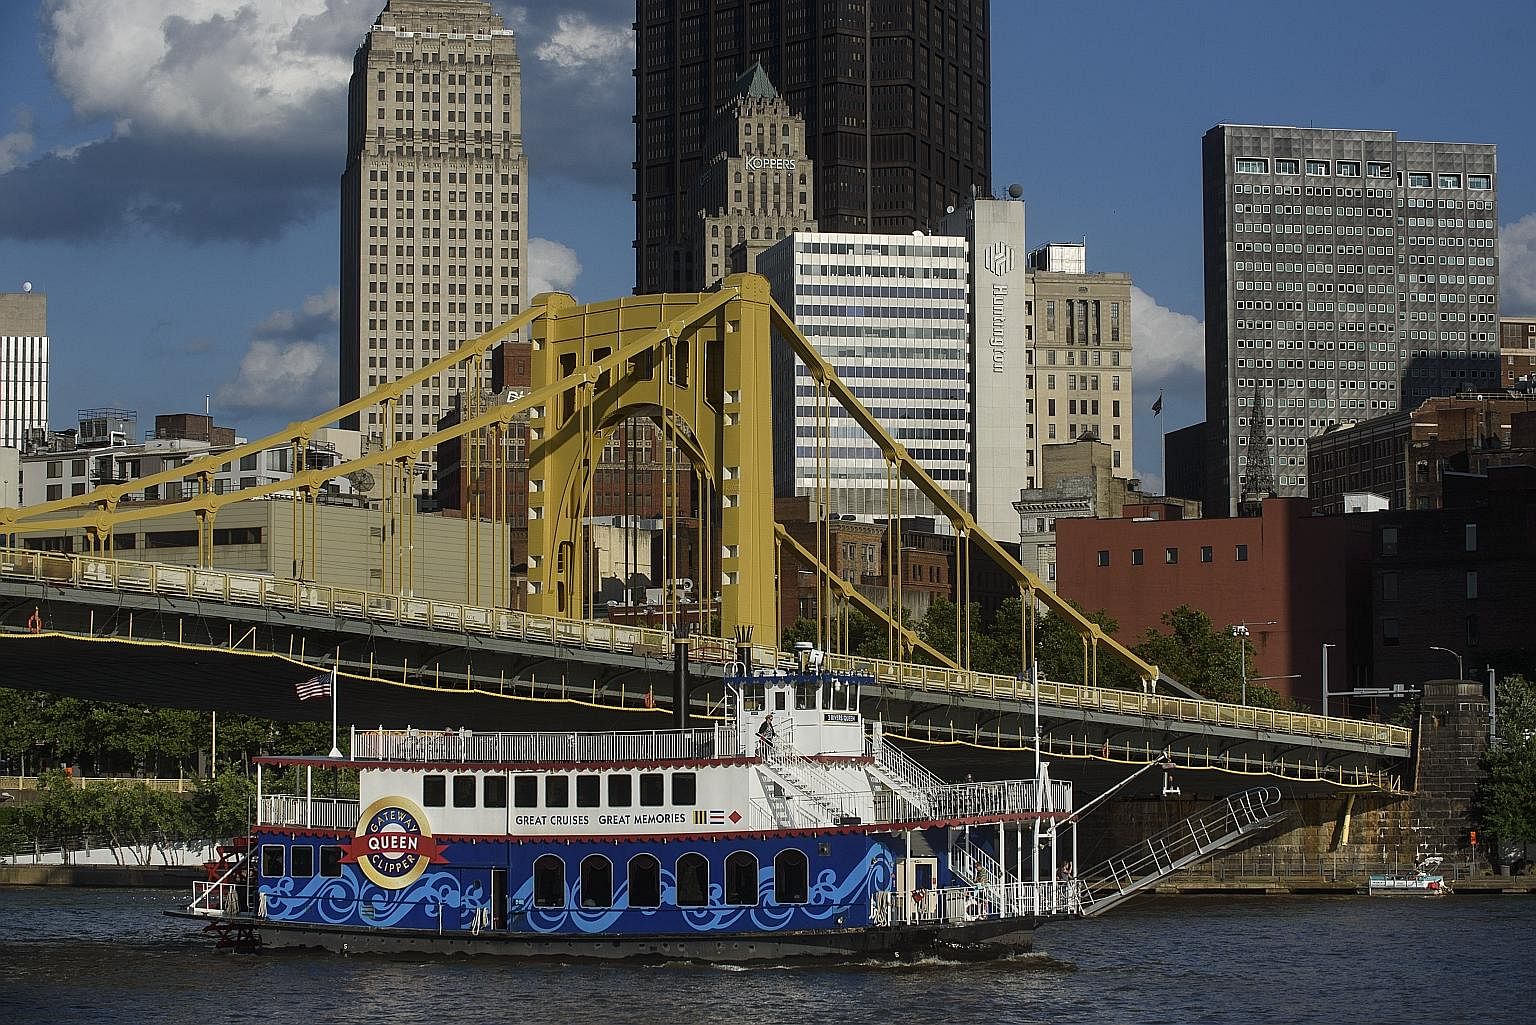 A riverboat plying the Allegheny River in Pittsburgh. Gone are the filthy smokestacks that once dominated the city's skyline. Today, a mixture of shiny new towers and historic old buildings rises above the river, while hip cafes and restaurants have sprun